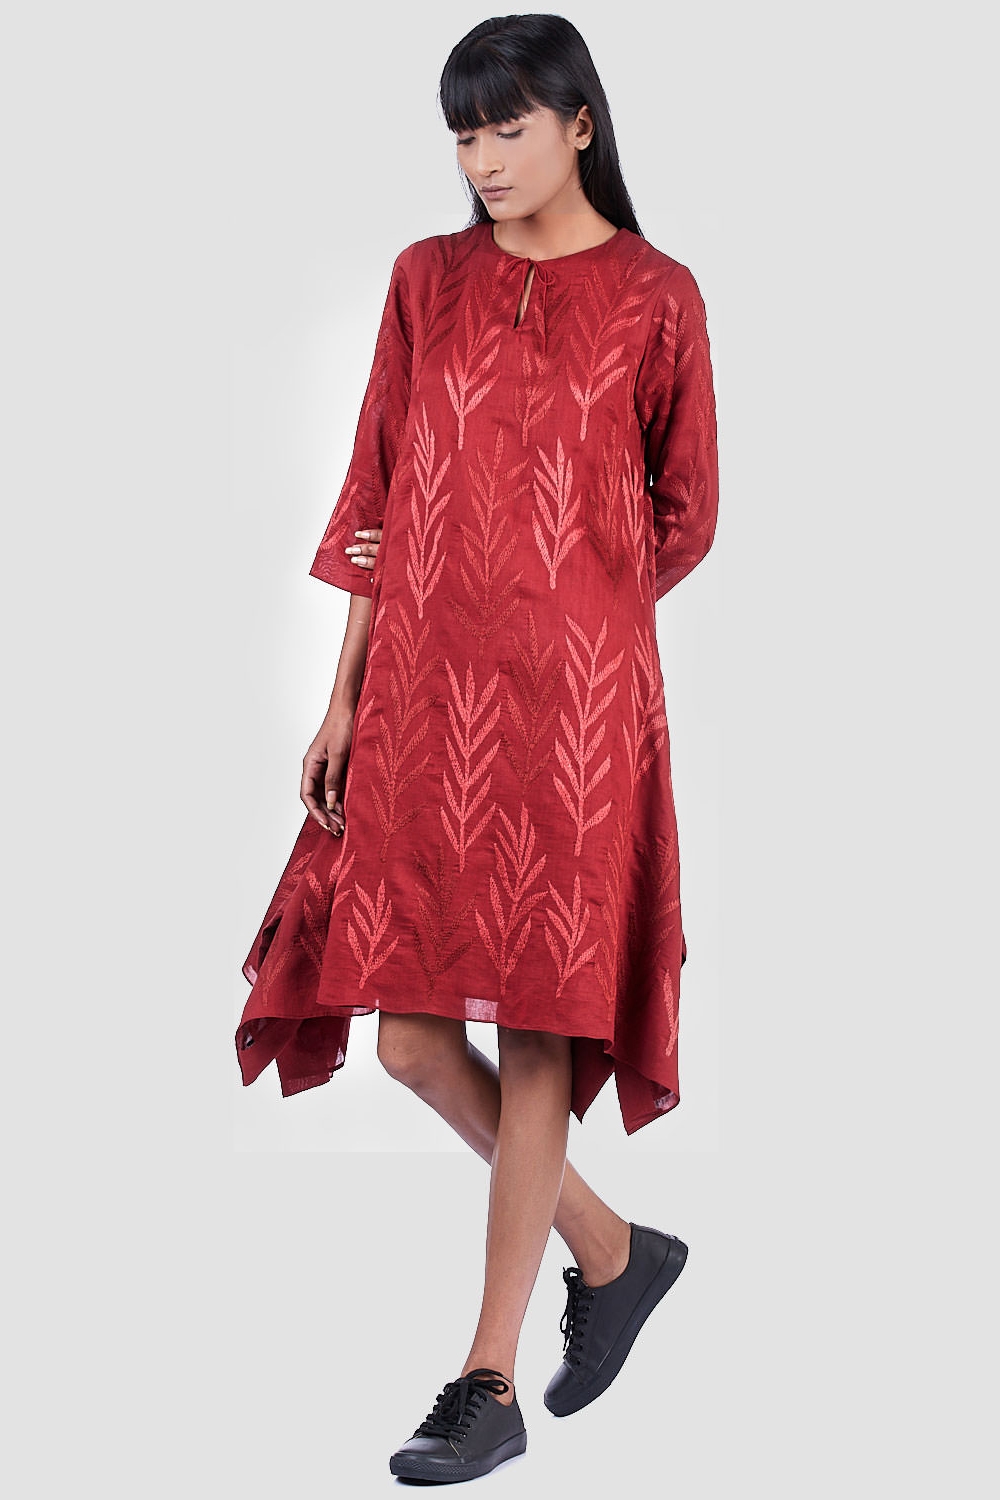 ABRAHAM AND THAKORE | Daal Embroidered Leaf Kite Dress